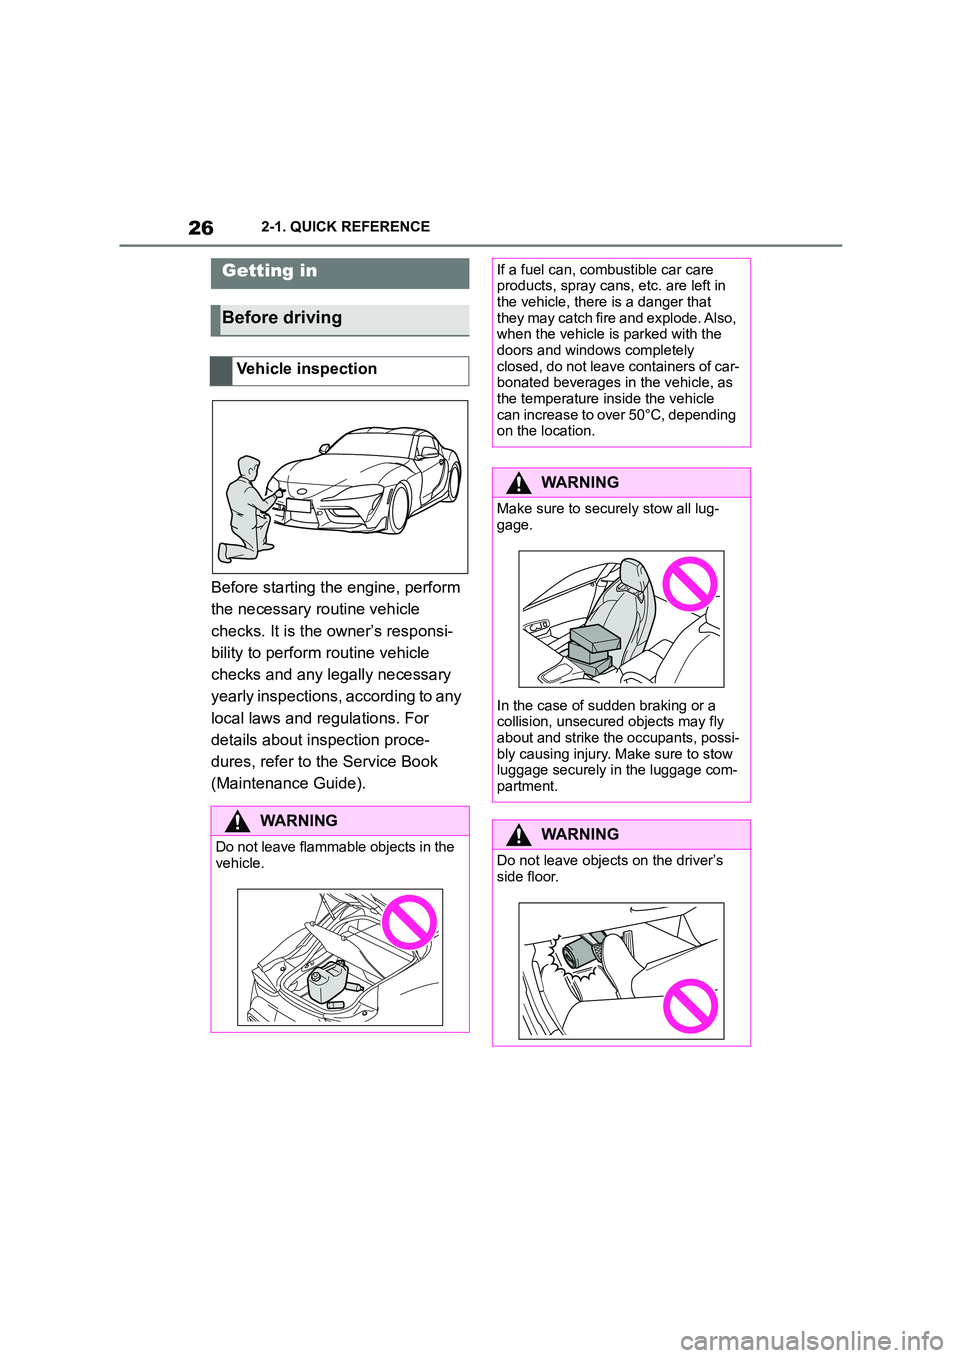 TOYOTA SUPRA 2022  Owners Manual 262-1. QUICK REFERENCE
2-1.QUICK REFERENCE
Before starting the engine, perform  
the necessary routine vehicle 
checks. It is the owner’s responsi-
bility to perform  routine vehicle  
checks and an